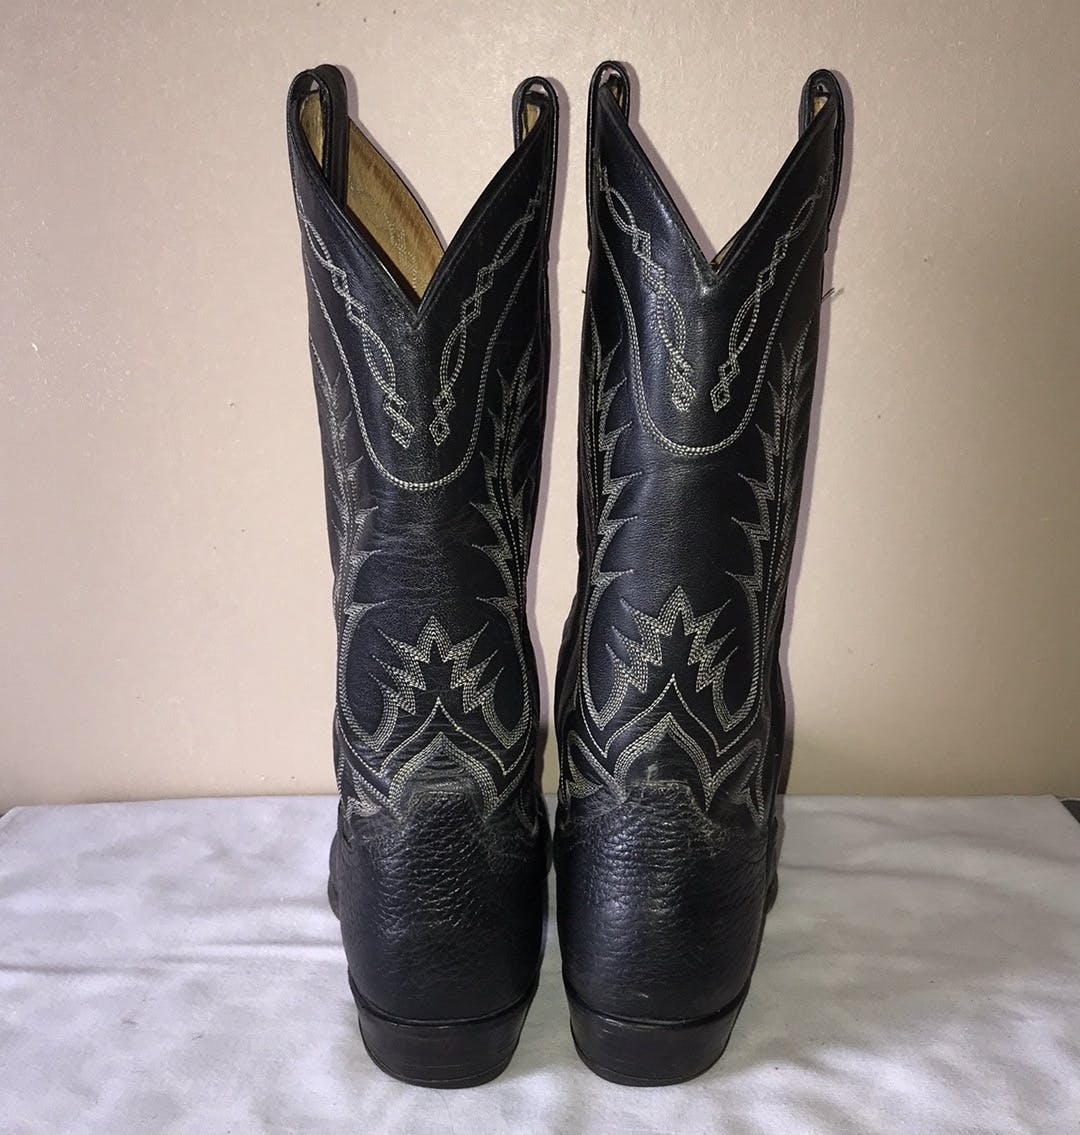 Vintage 80's Leather Cowboy Boots by Tony Lama | Shop THRILLING